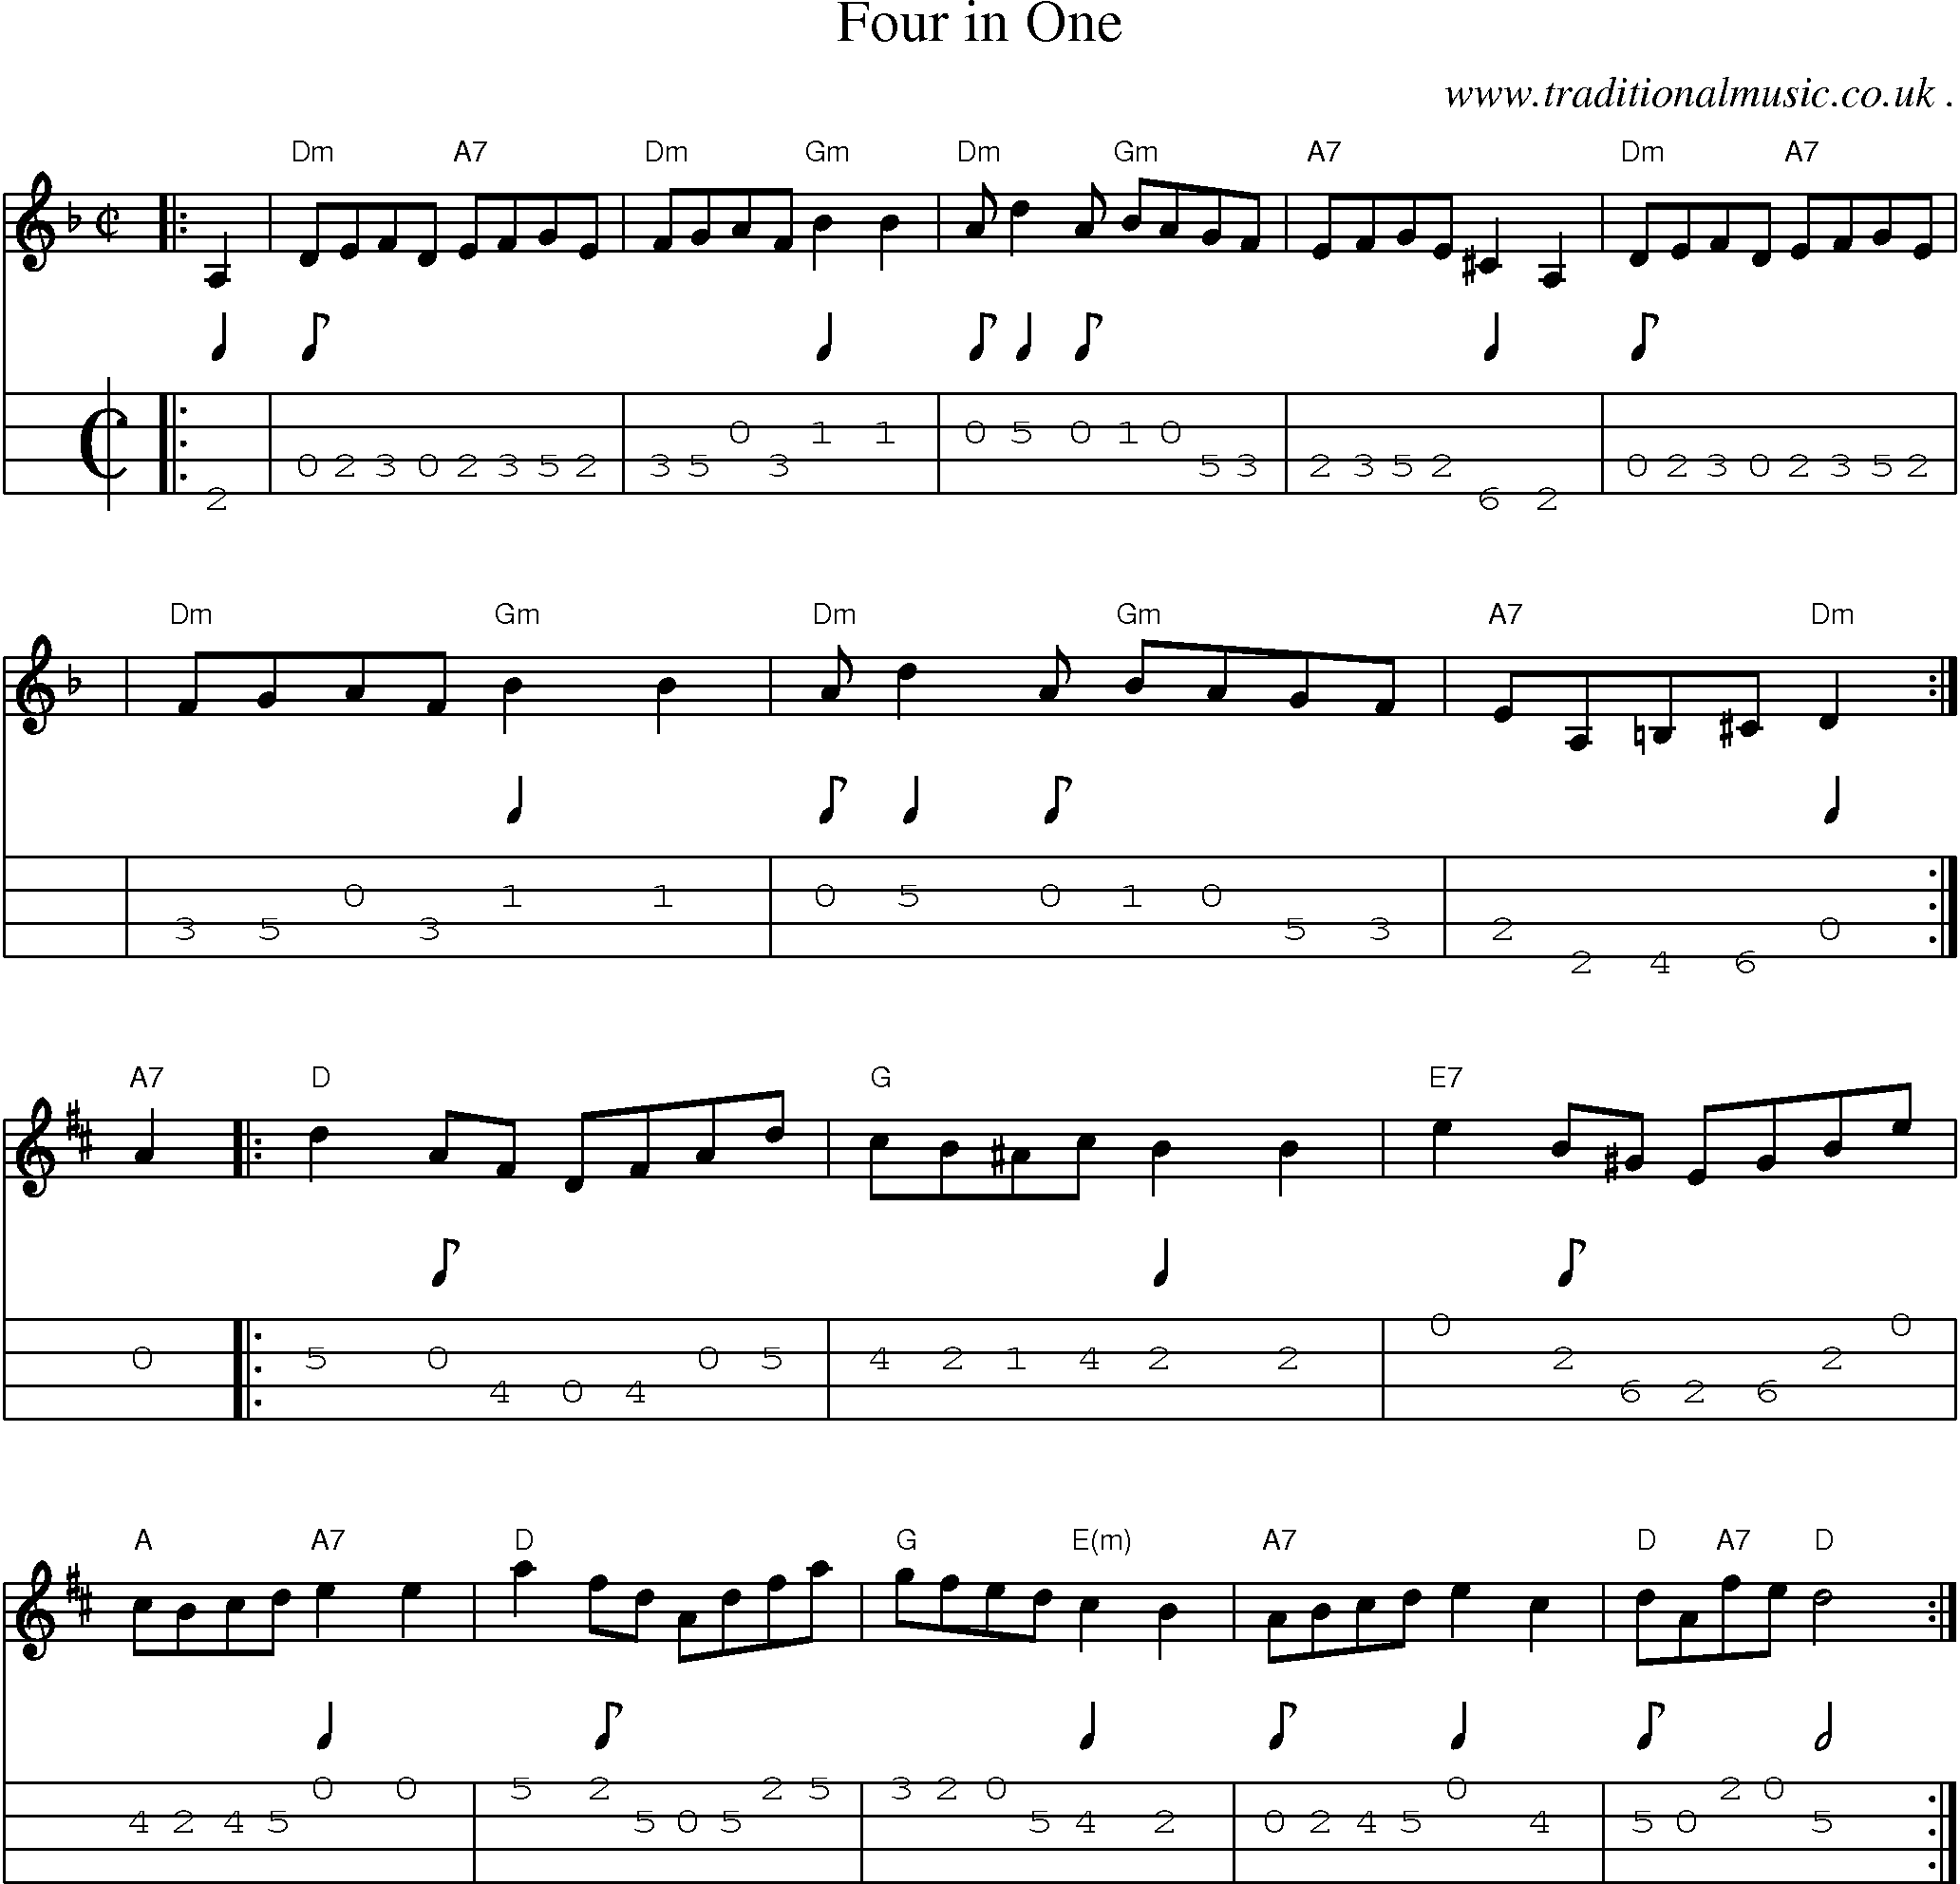 Sheet-music  score, Chords and Mandolin Tabs for Four In One